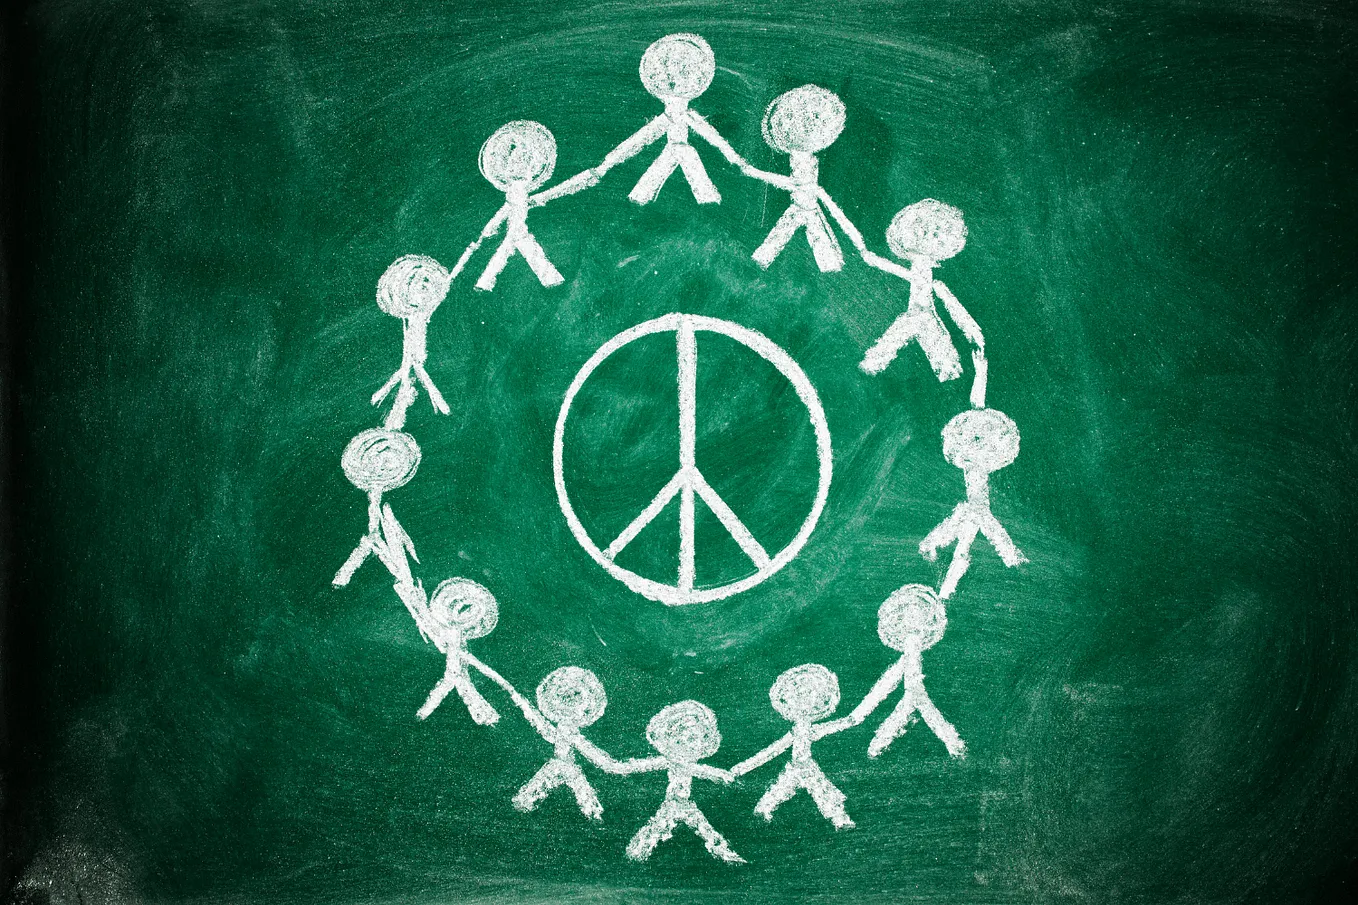 Education is our way for peace